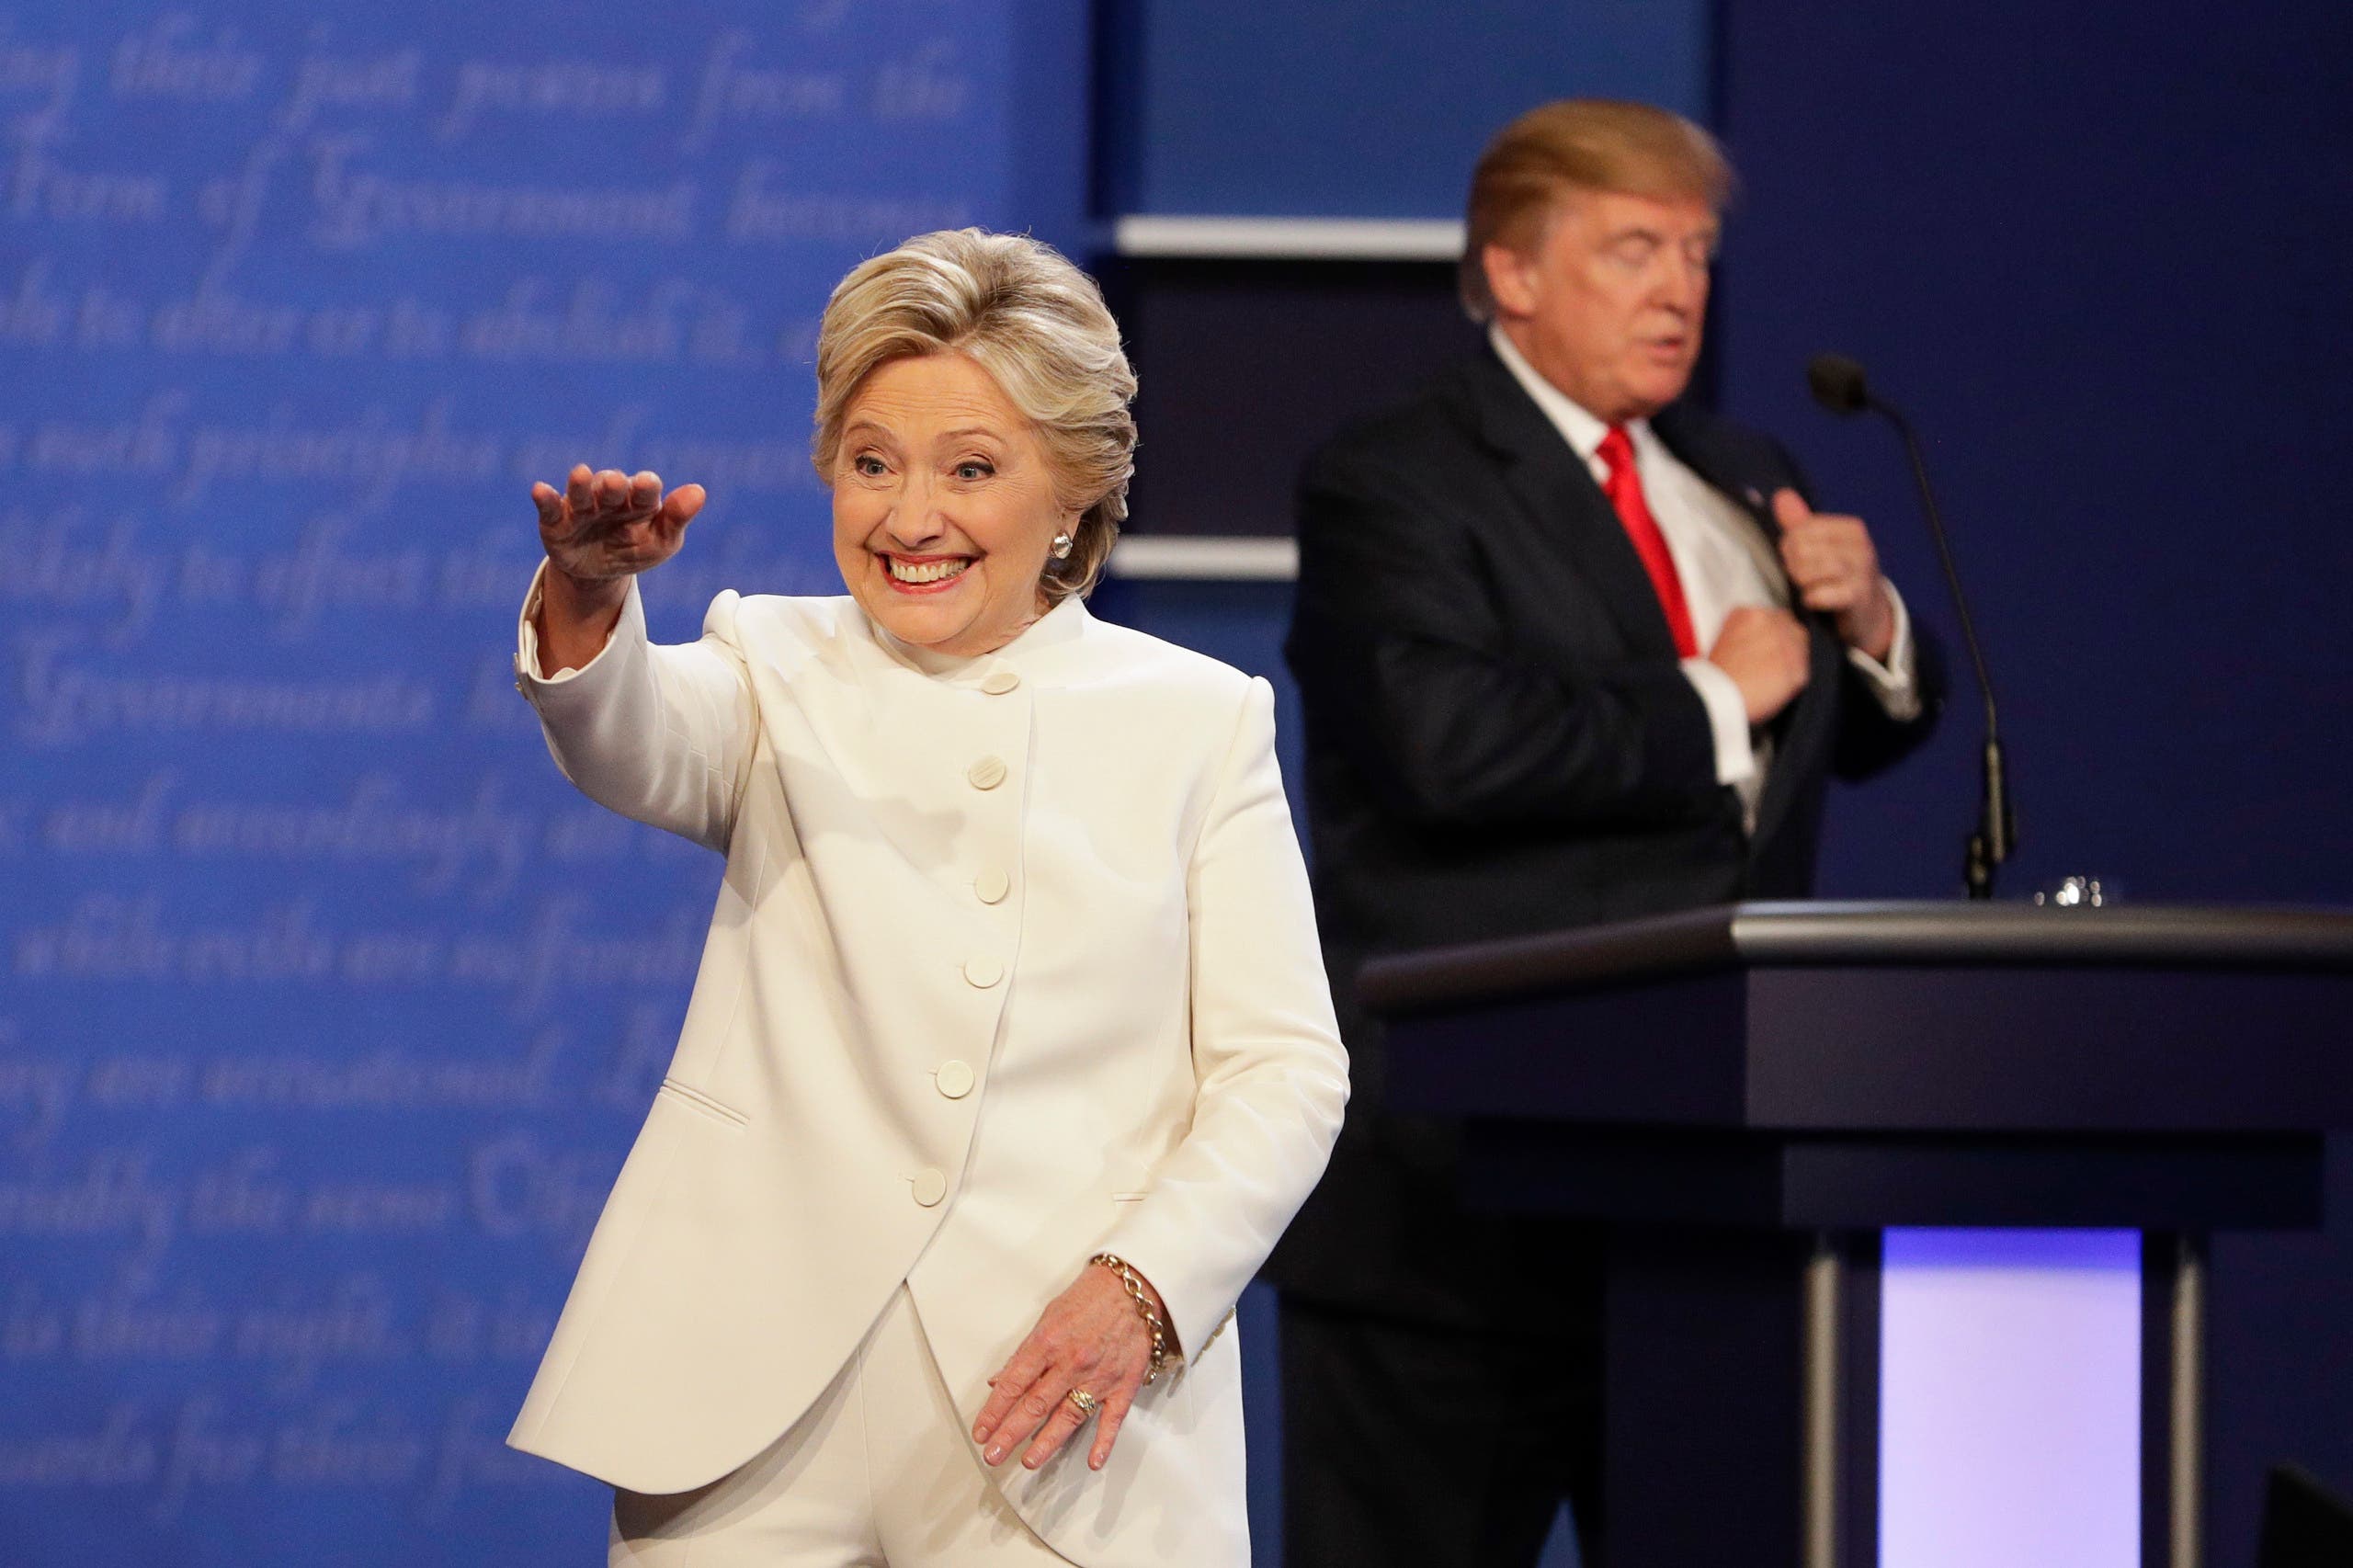 Democratic presidential nominee Hillary Clinton waves to the audience as Republican presidential nominee Donald Trump puts away his notes after the third presidential debate at UNLV in Las Vegas, Wednesday, Oct. 19, 2016. (AP 